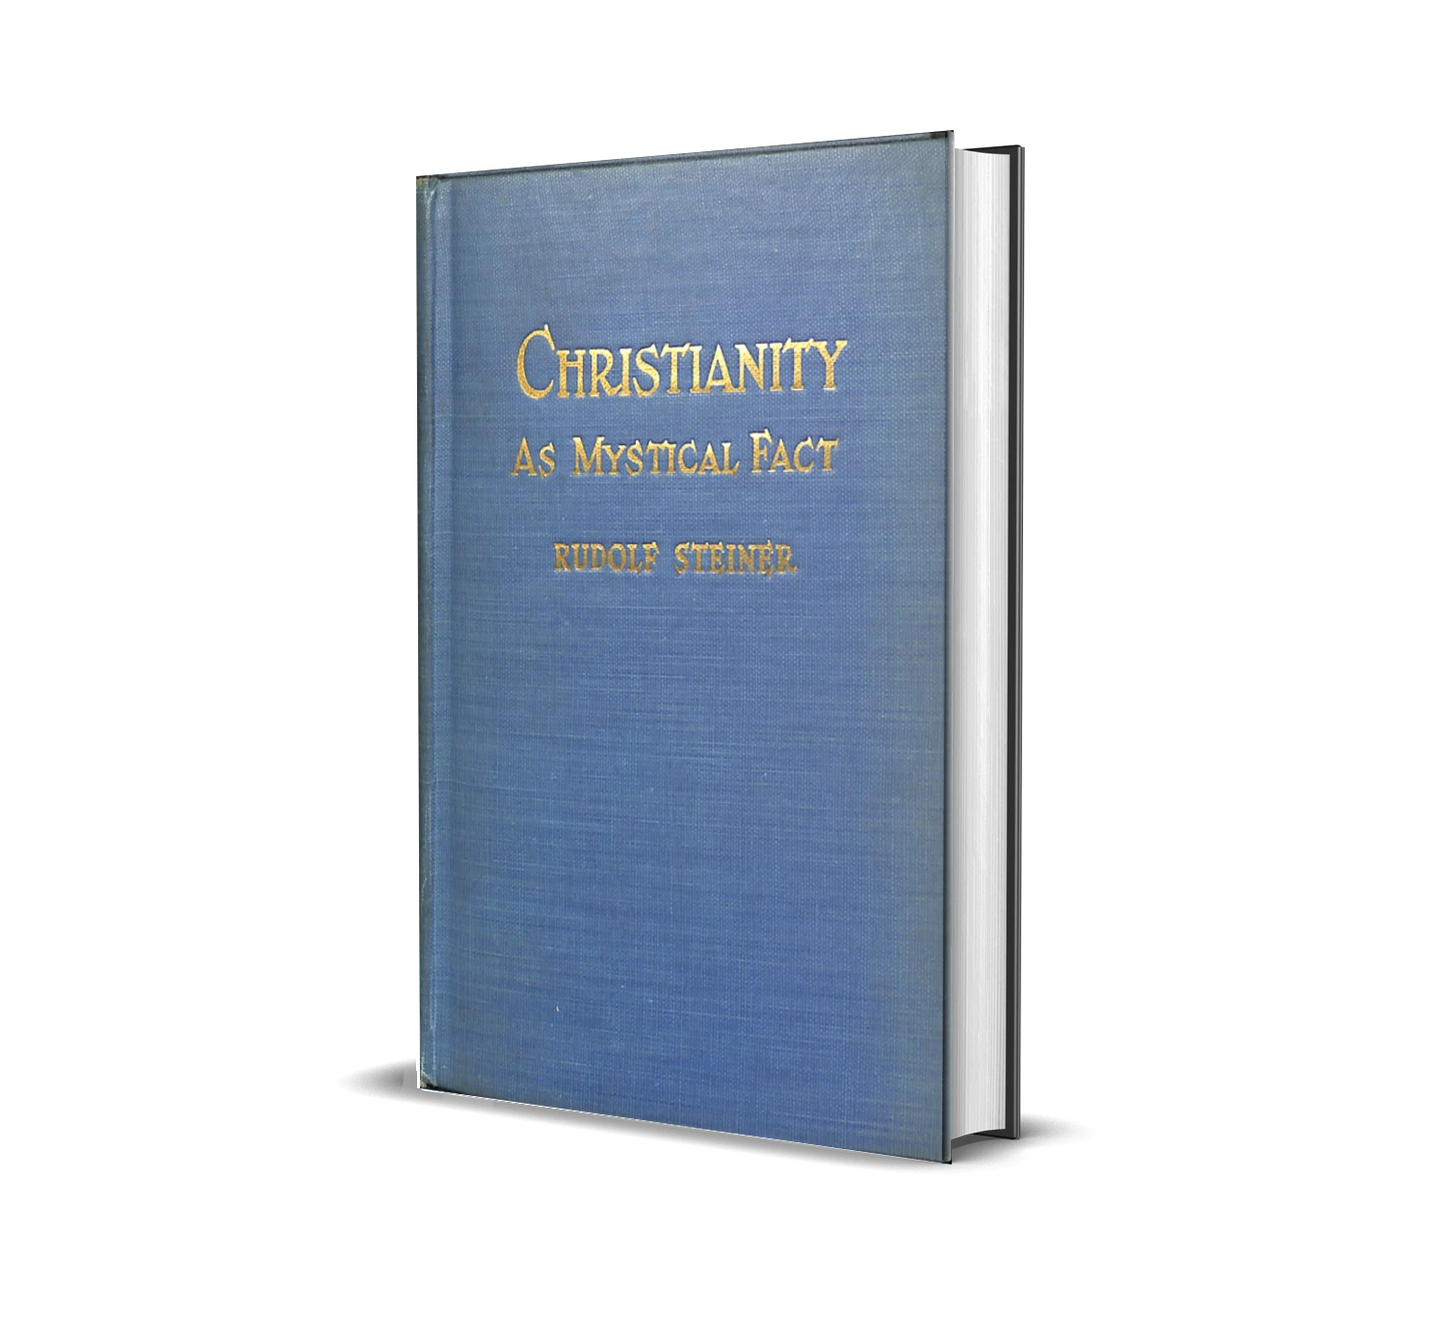 Christianity as a Mystical Fact